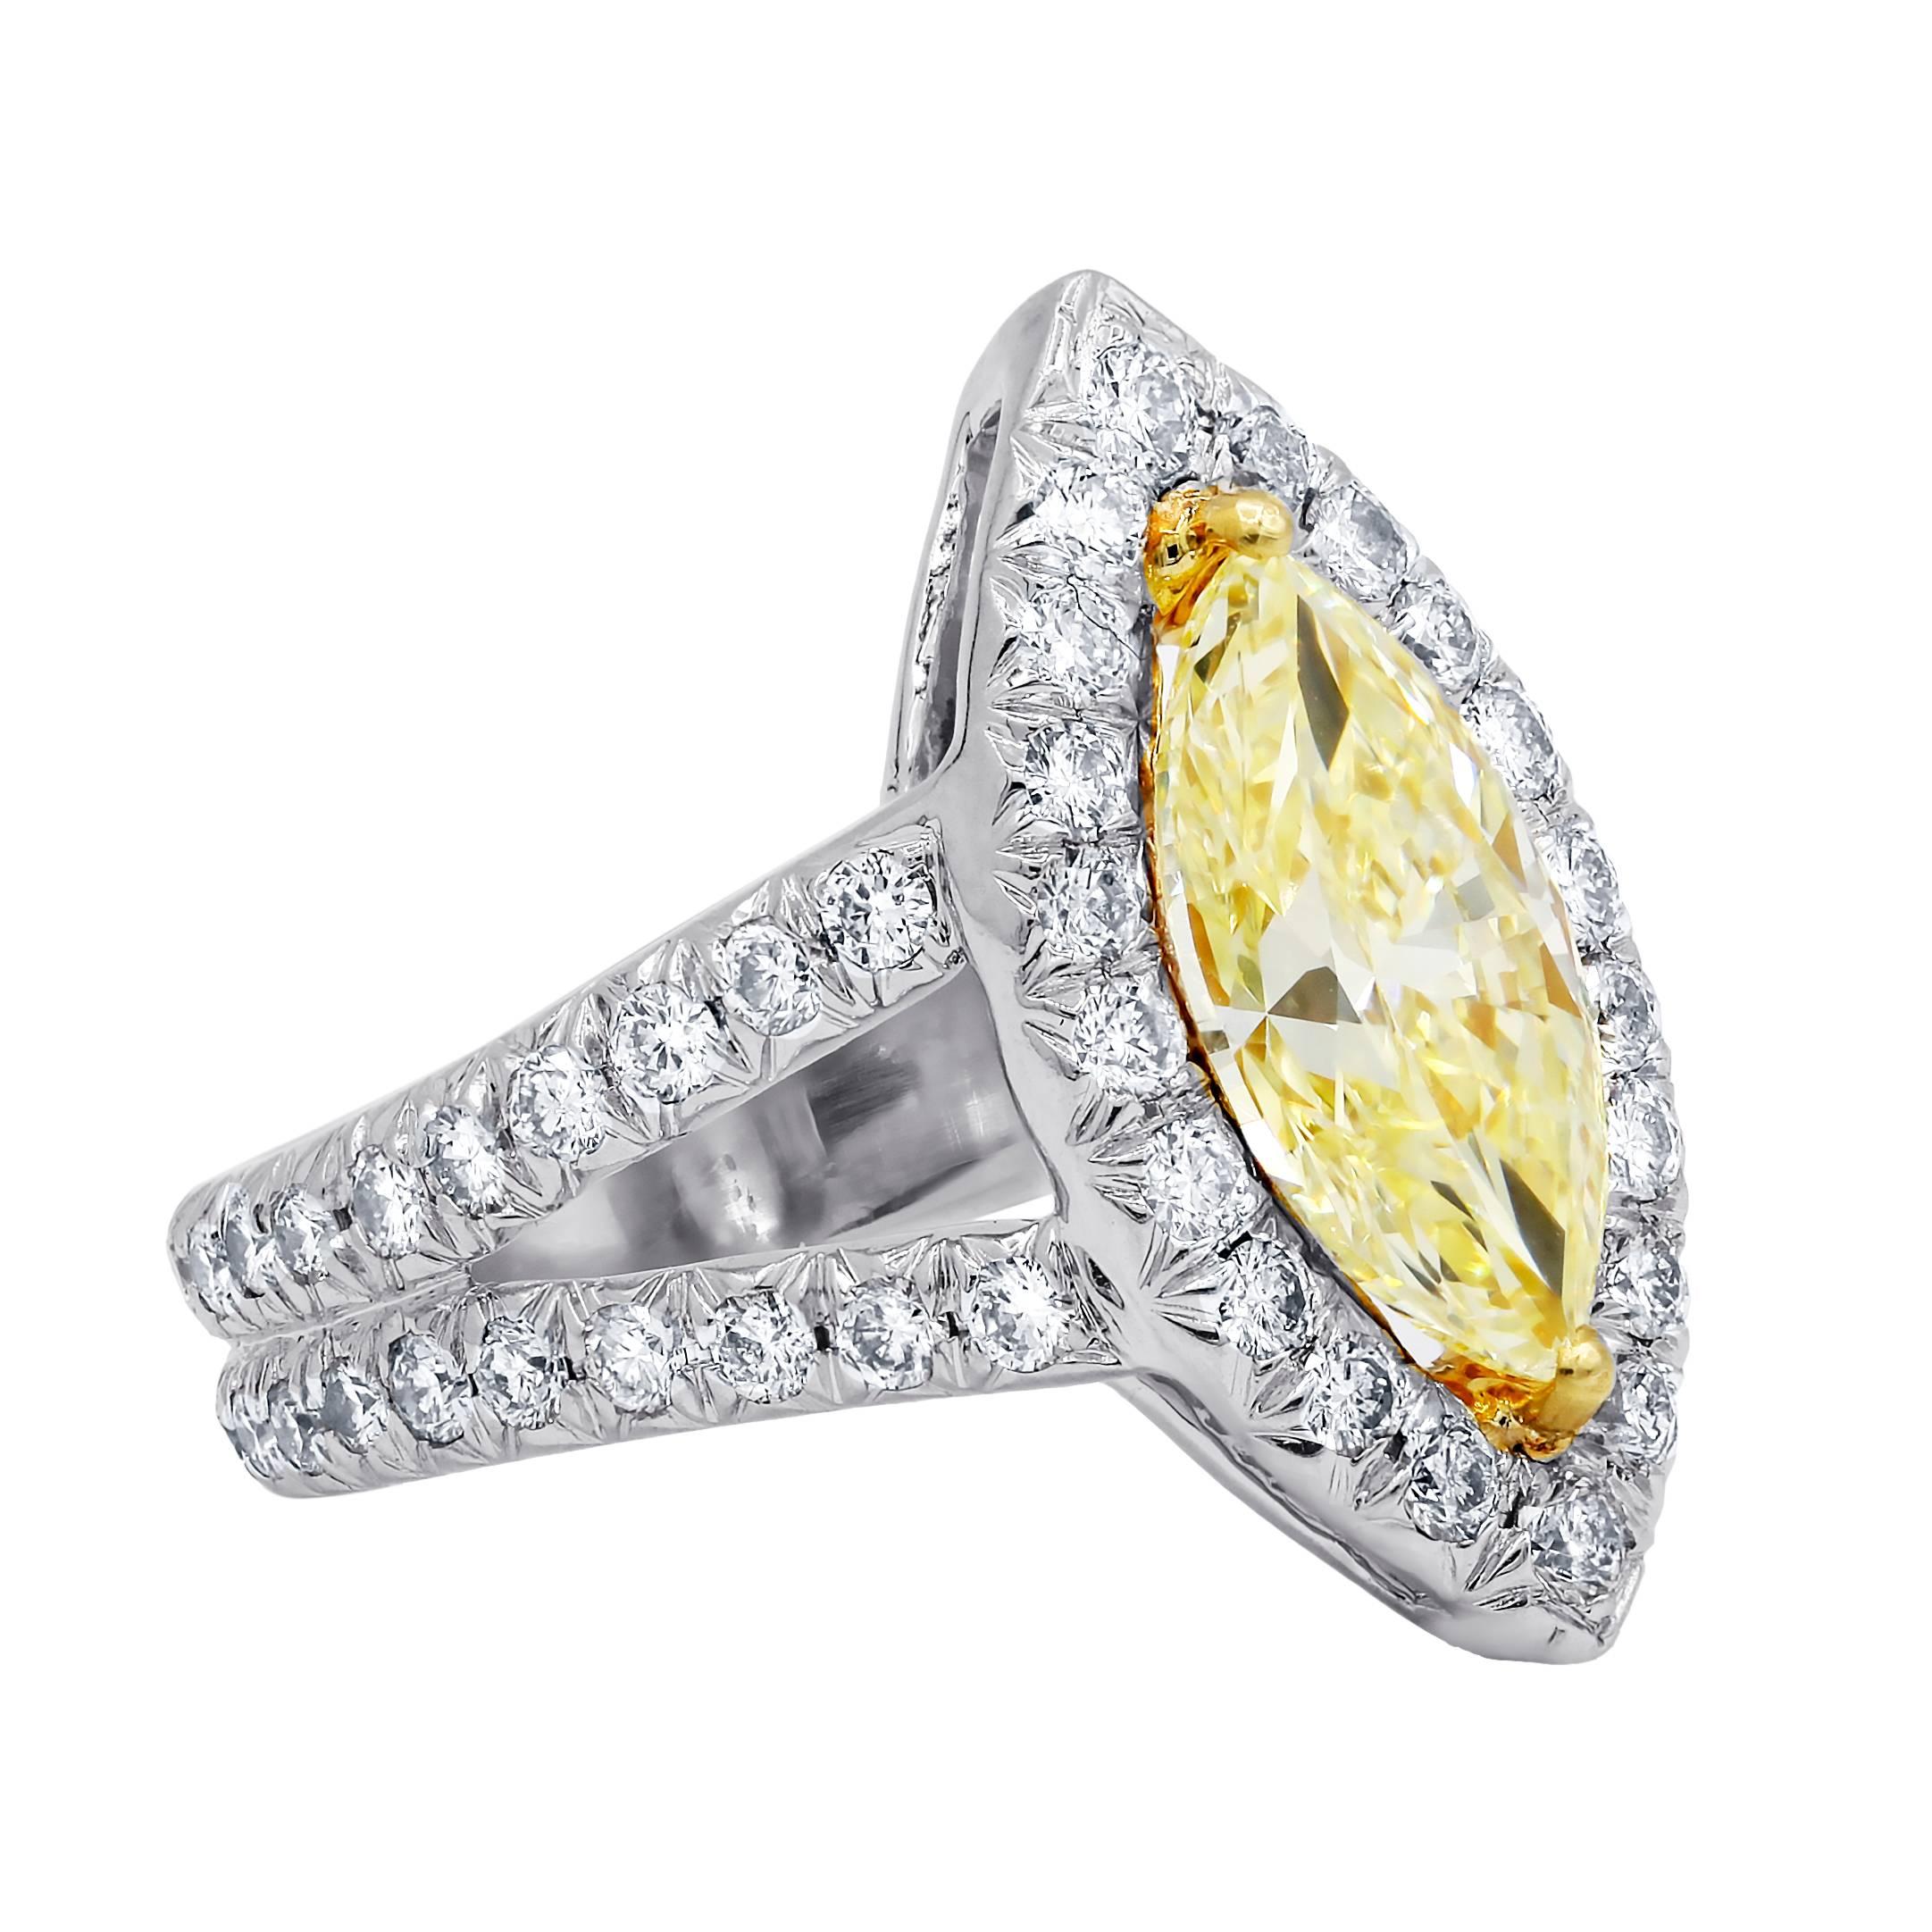 Platinum and 18kt diamond engagement ring with 2.51 cts fancy yellow vs2 
Set in a split shank setting with diamonds set all the way around and in halo
